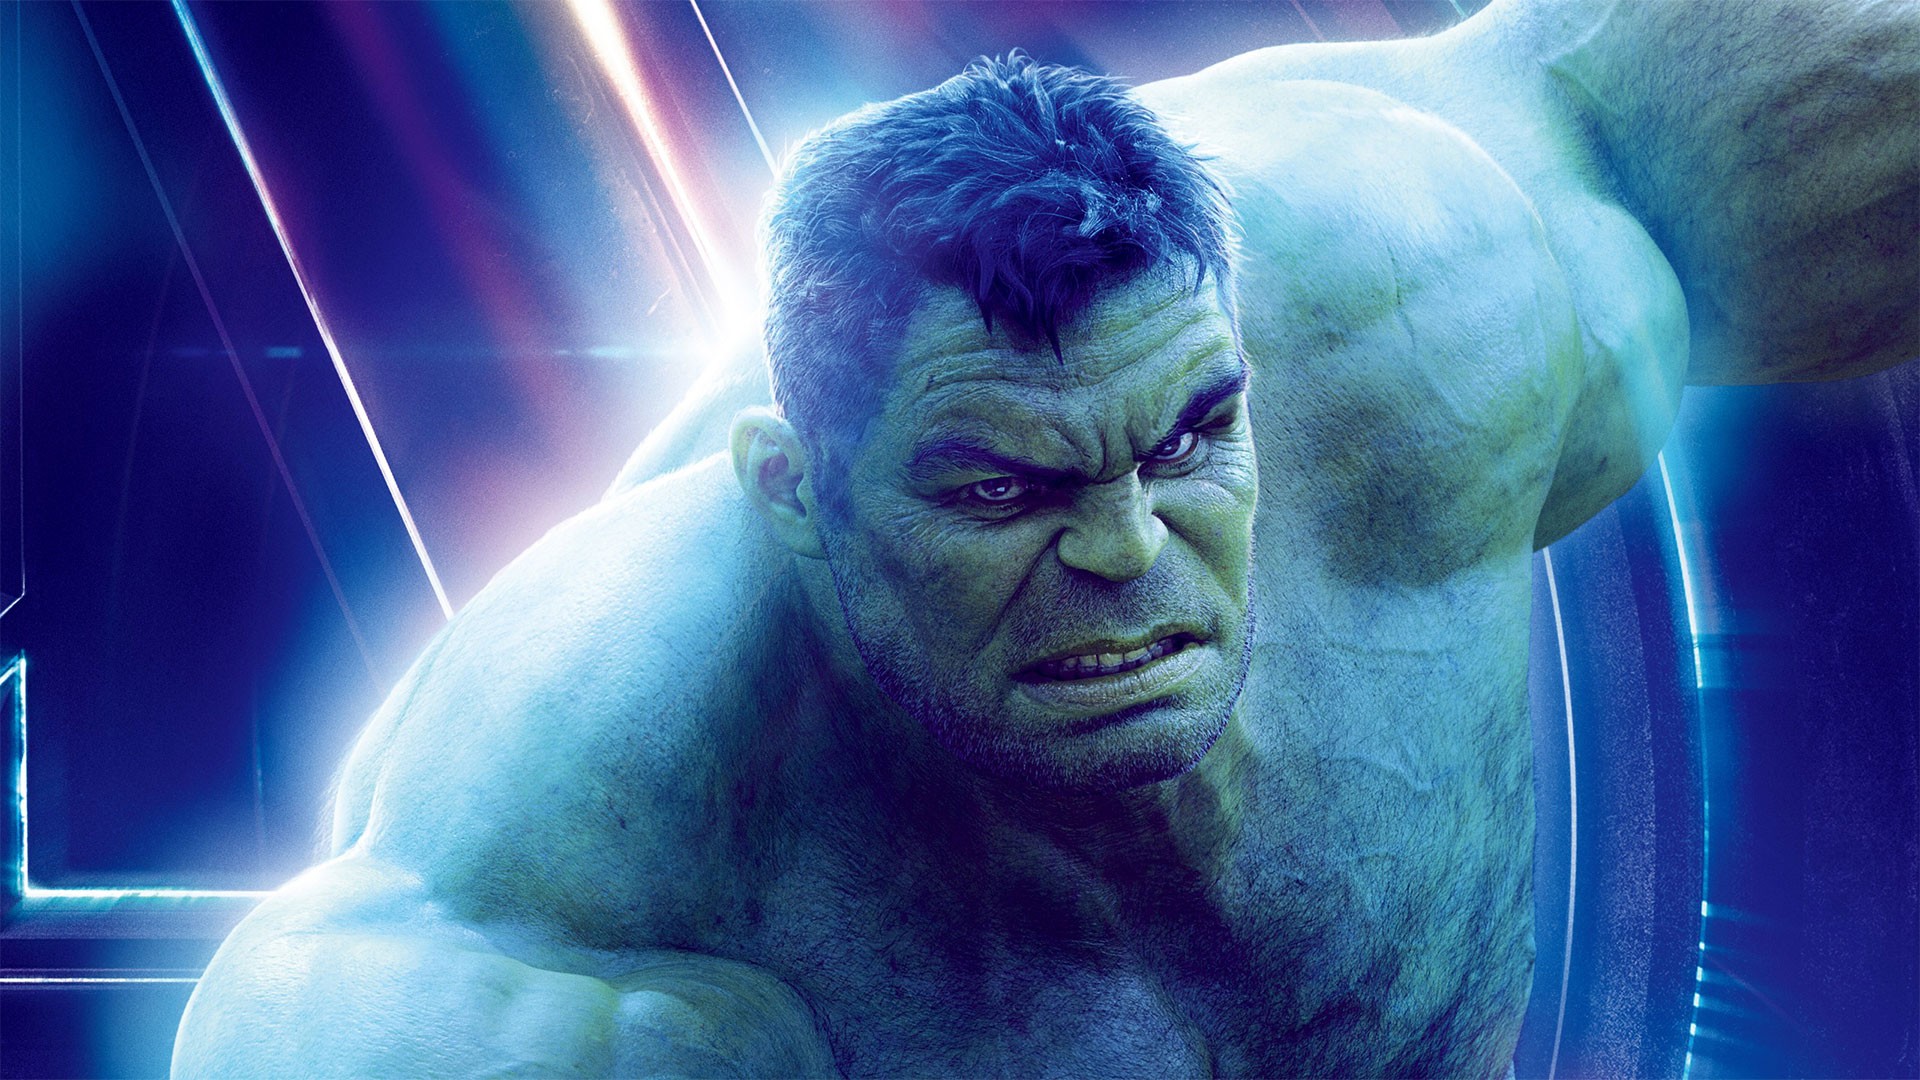 Hulk Avengers Endgame Wallpaper HD with high-resolution 1920x1080 pixel. You can use this poster wallpaper for your Desktop Computers, Mac Screensavers, Windows Backgrounds, iPhone Wallpapers, Tablet or Android Lock screen and another Mobile device